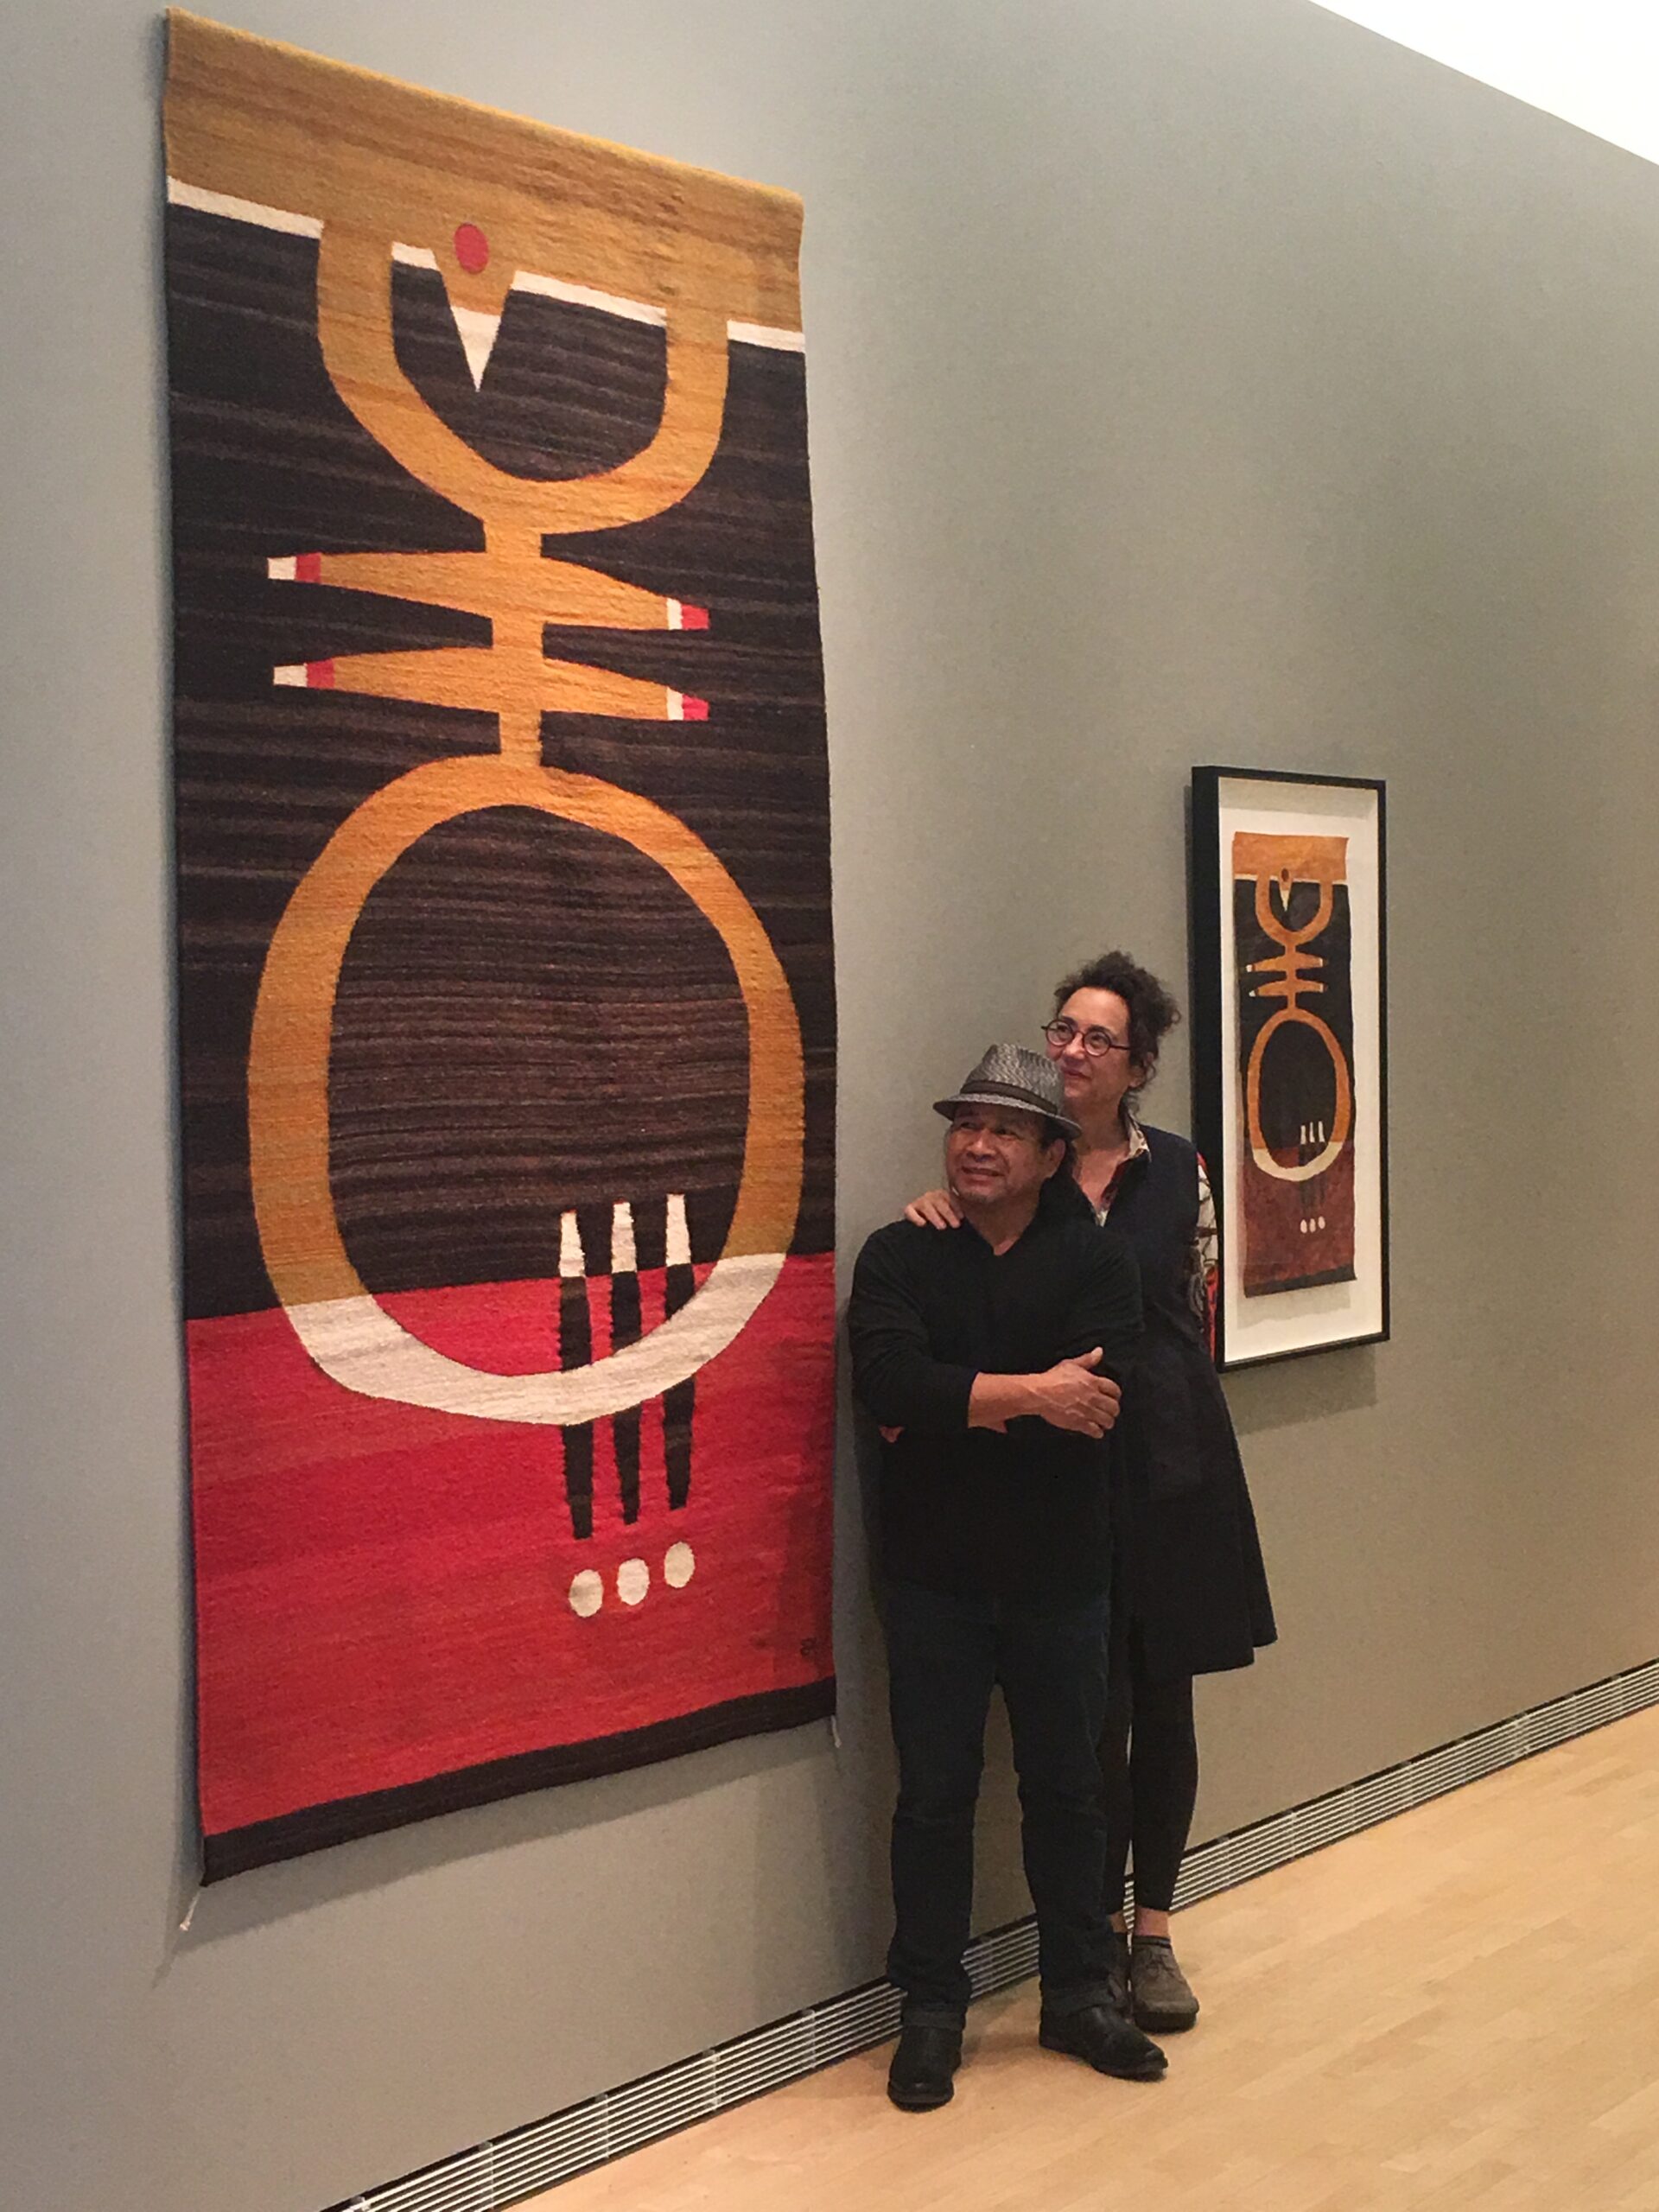 Two people stand by a hung woven textile work that looks similar to a work on paper mounted behind them on a wall.